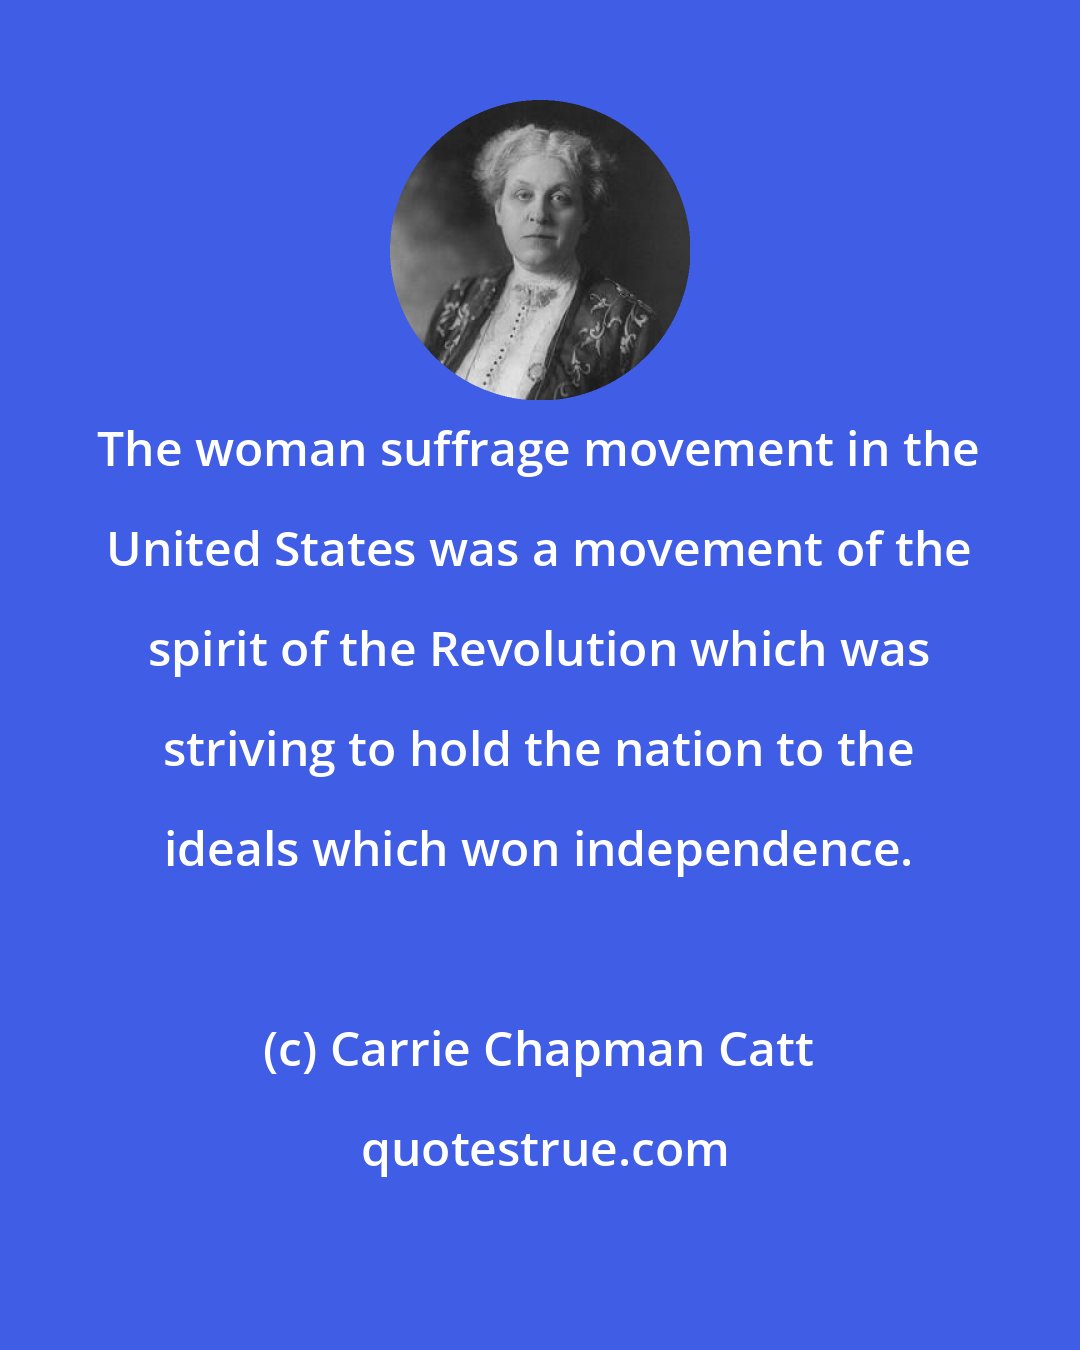 Carrie Chapman Catt: The woman suffrage movement in the United States was a movement of the spirit of the Revolution which was striving to hold the nation to the ideals which won independence.